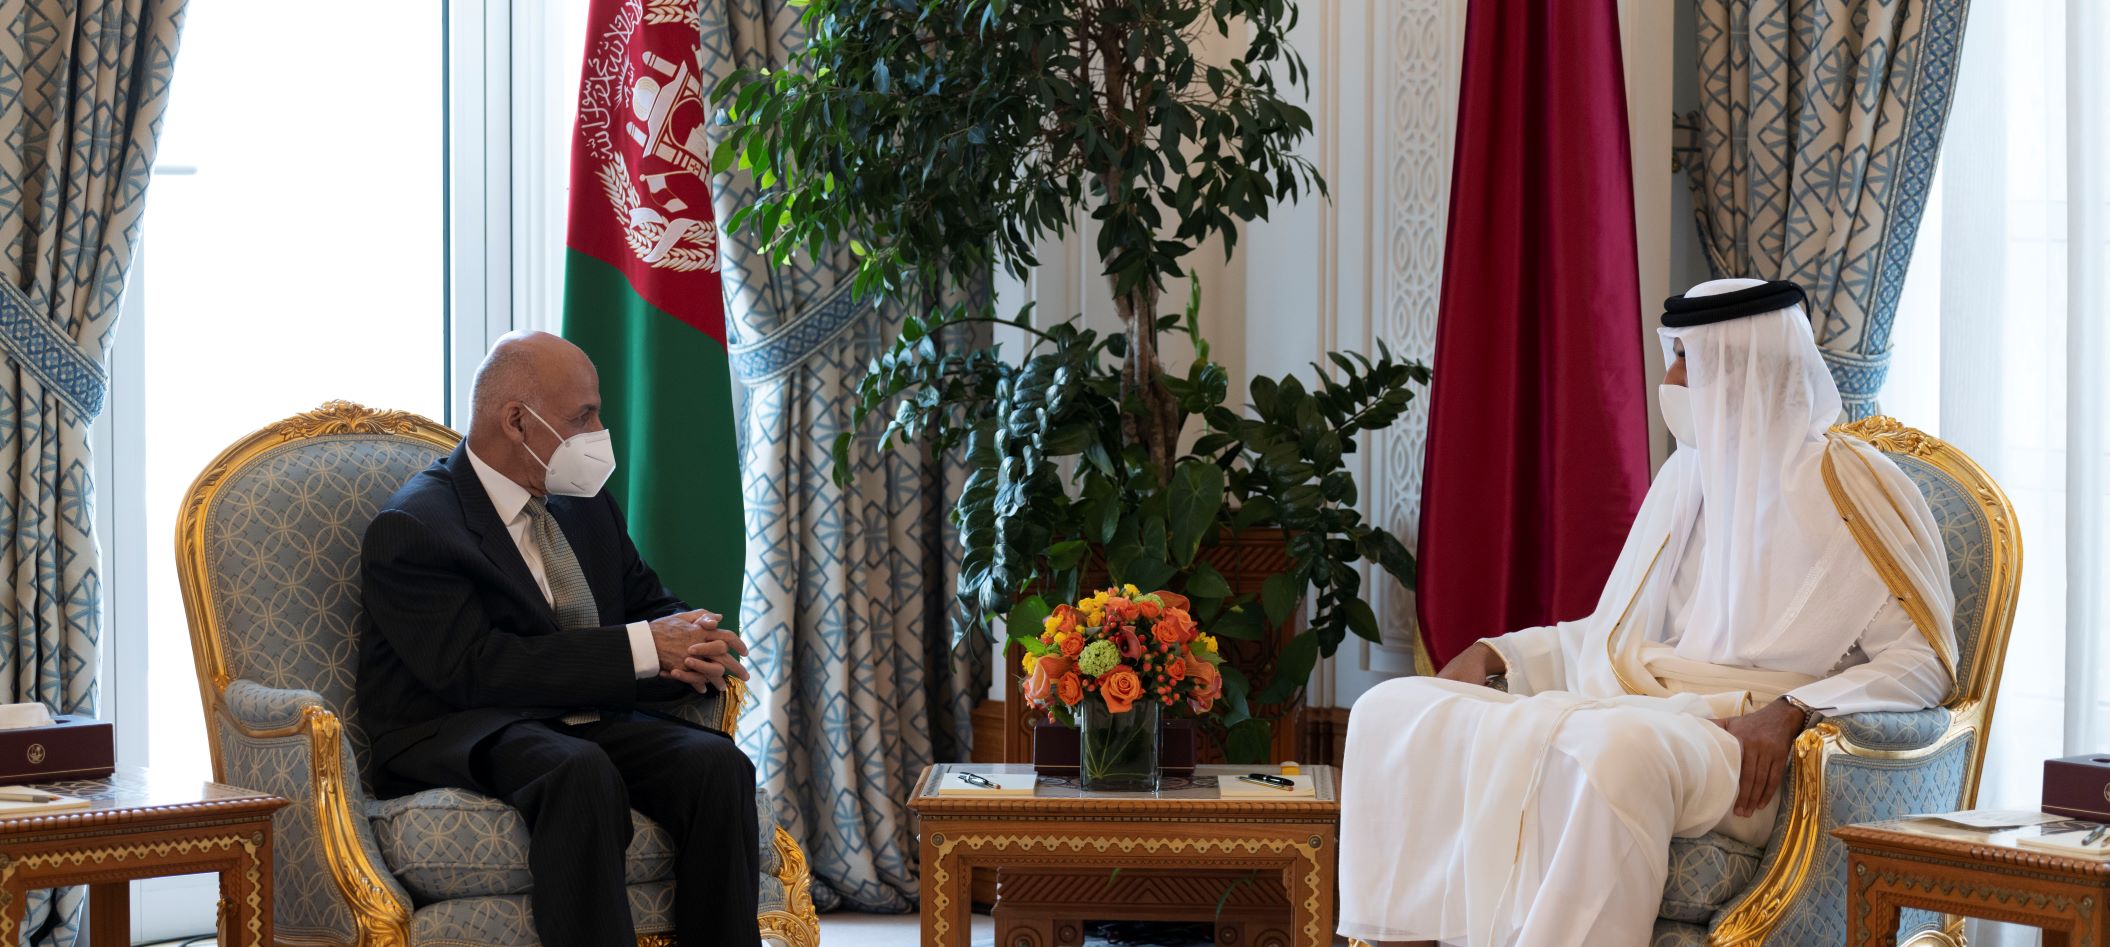 Amir and Afghan President Hold Official Talks